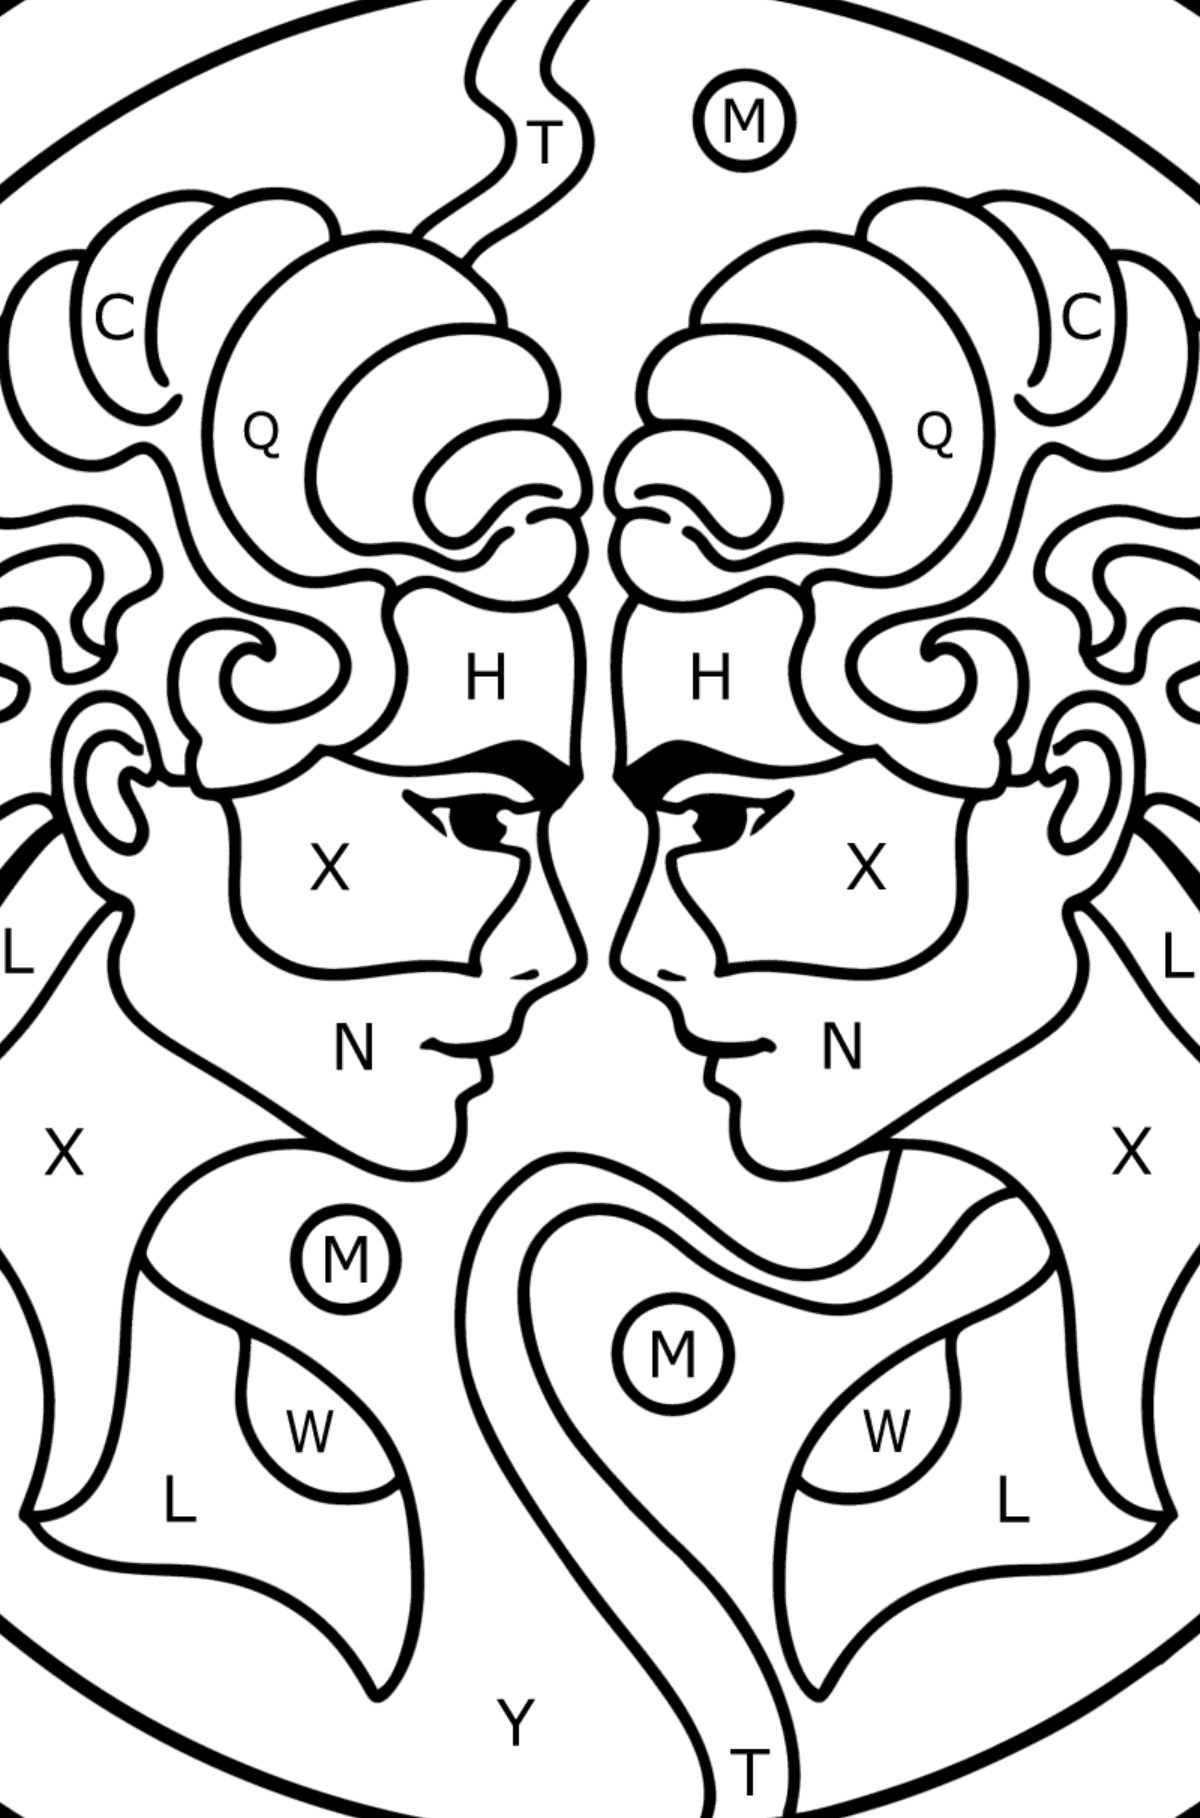 Coloring page for kids - Gemini zodiac sign - Coloring by Letters for Kids